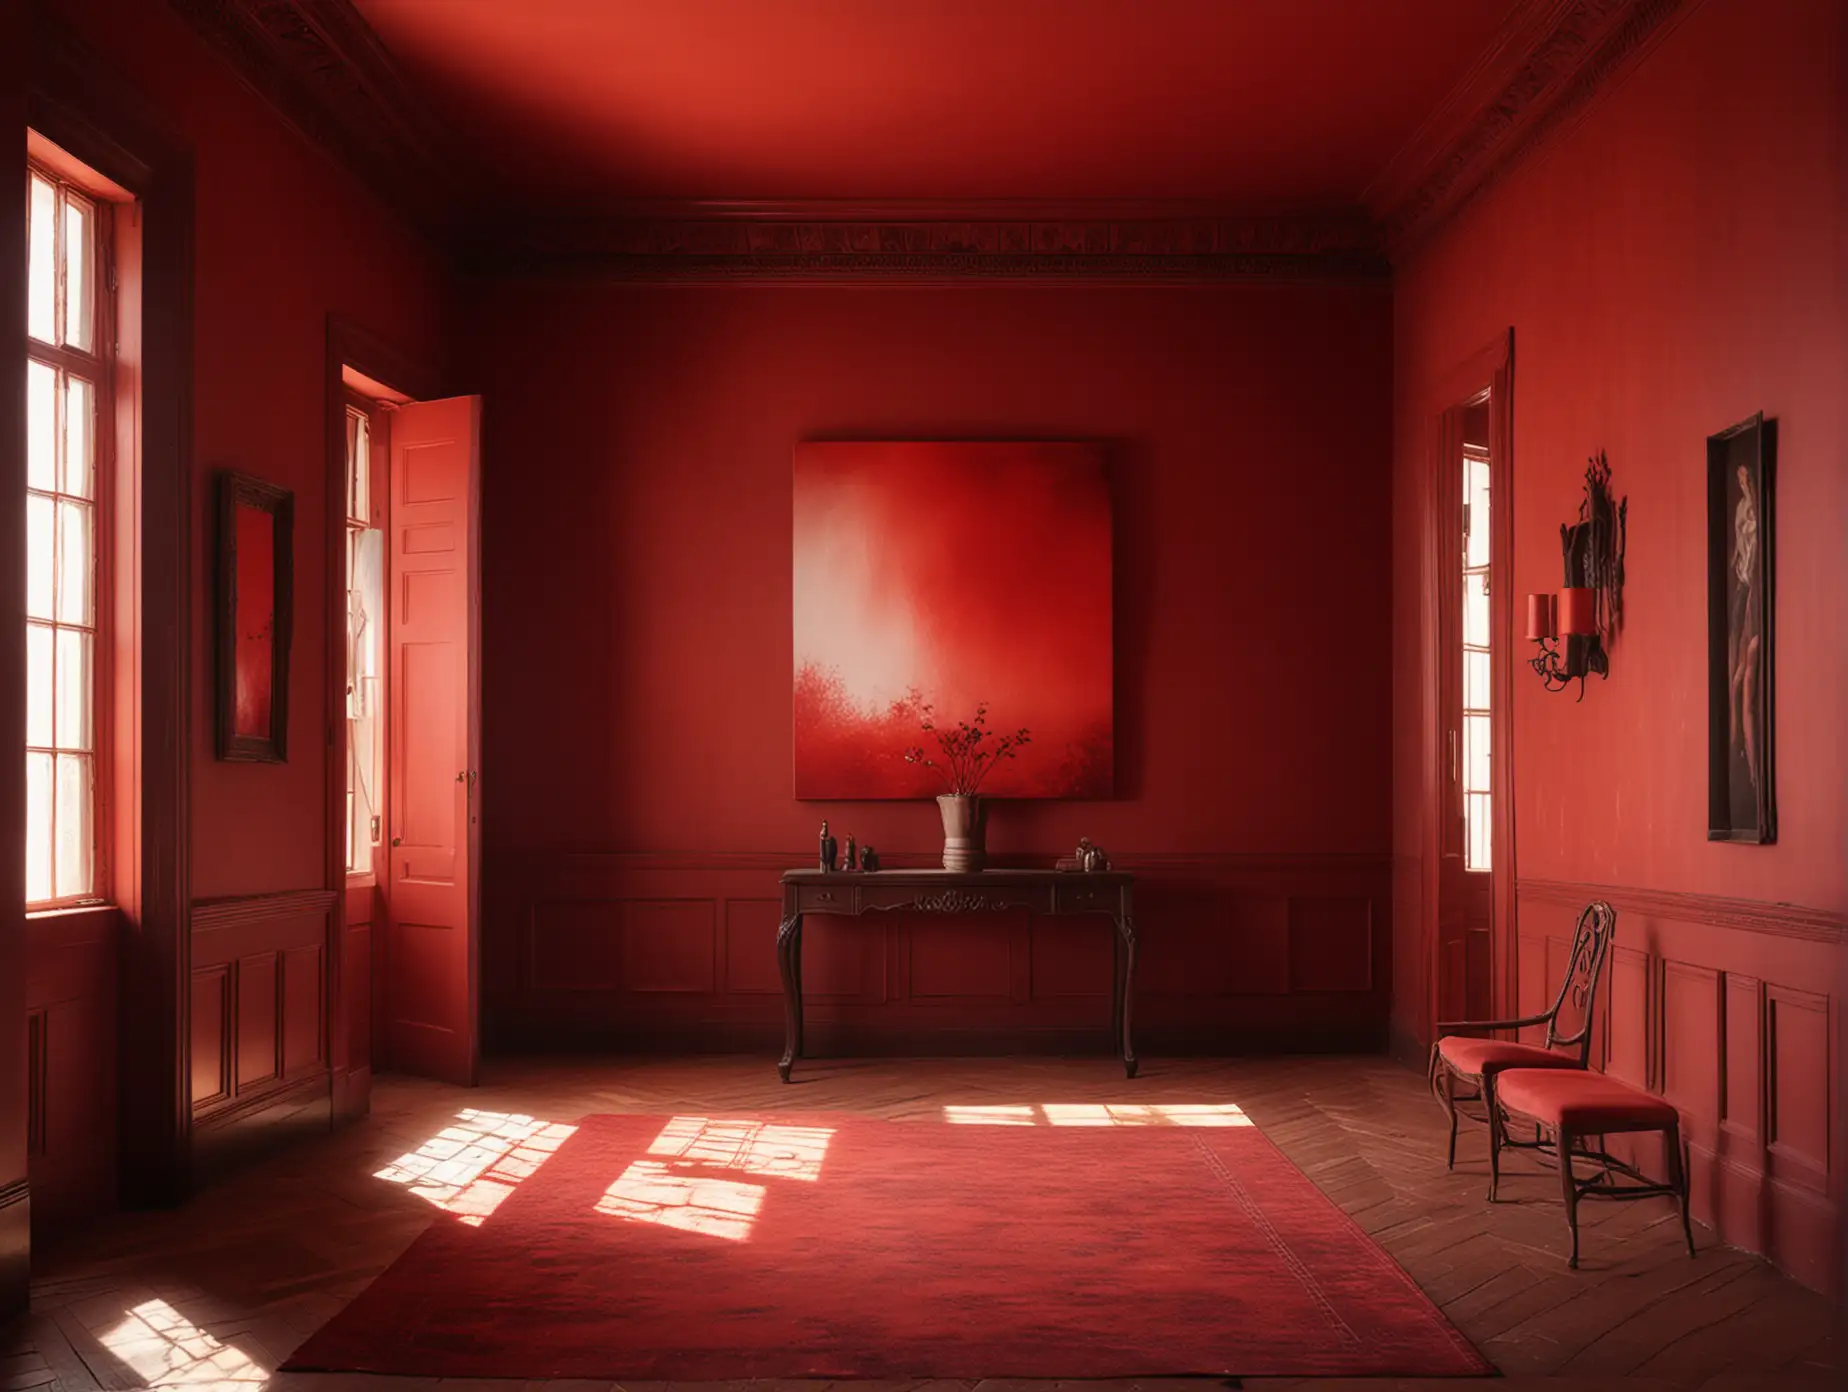 Vibrant Red Room with Art and Natural Daylight